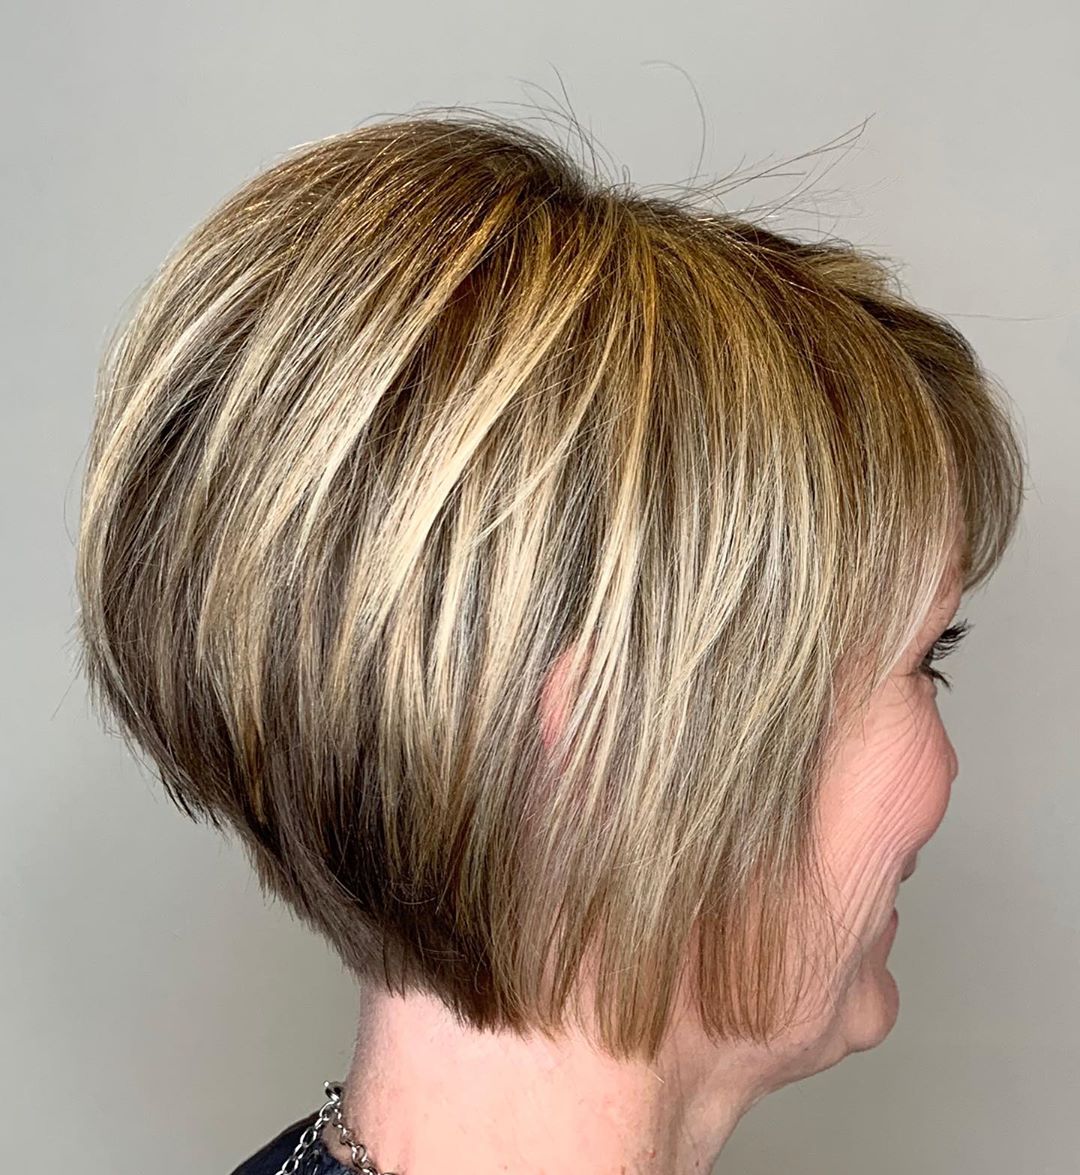 27 Chic Short Hairstyles for Women Over 50 with Fine Hair – Hairstyles VIP